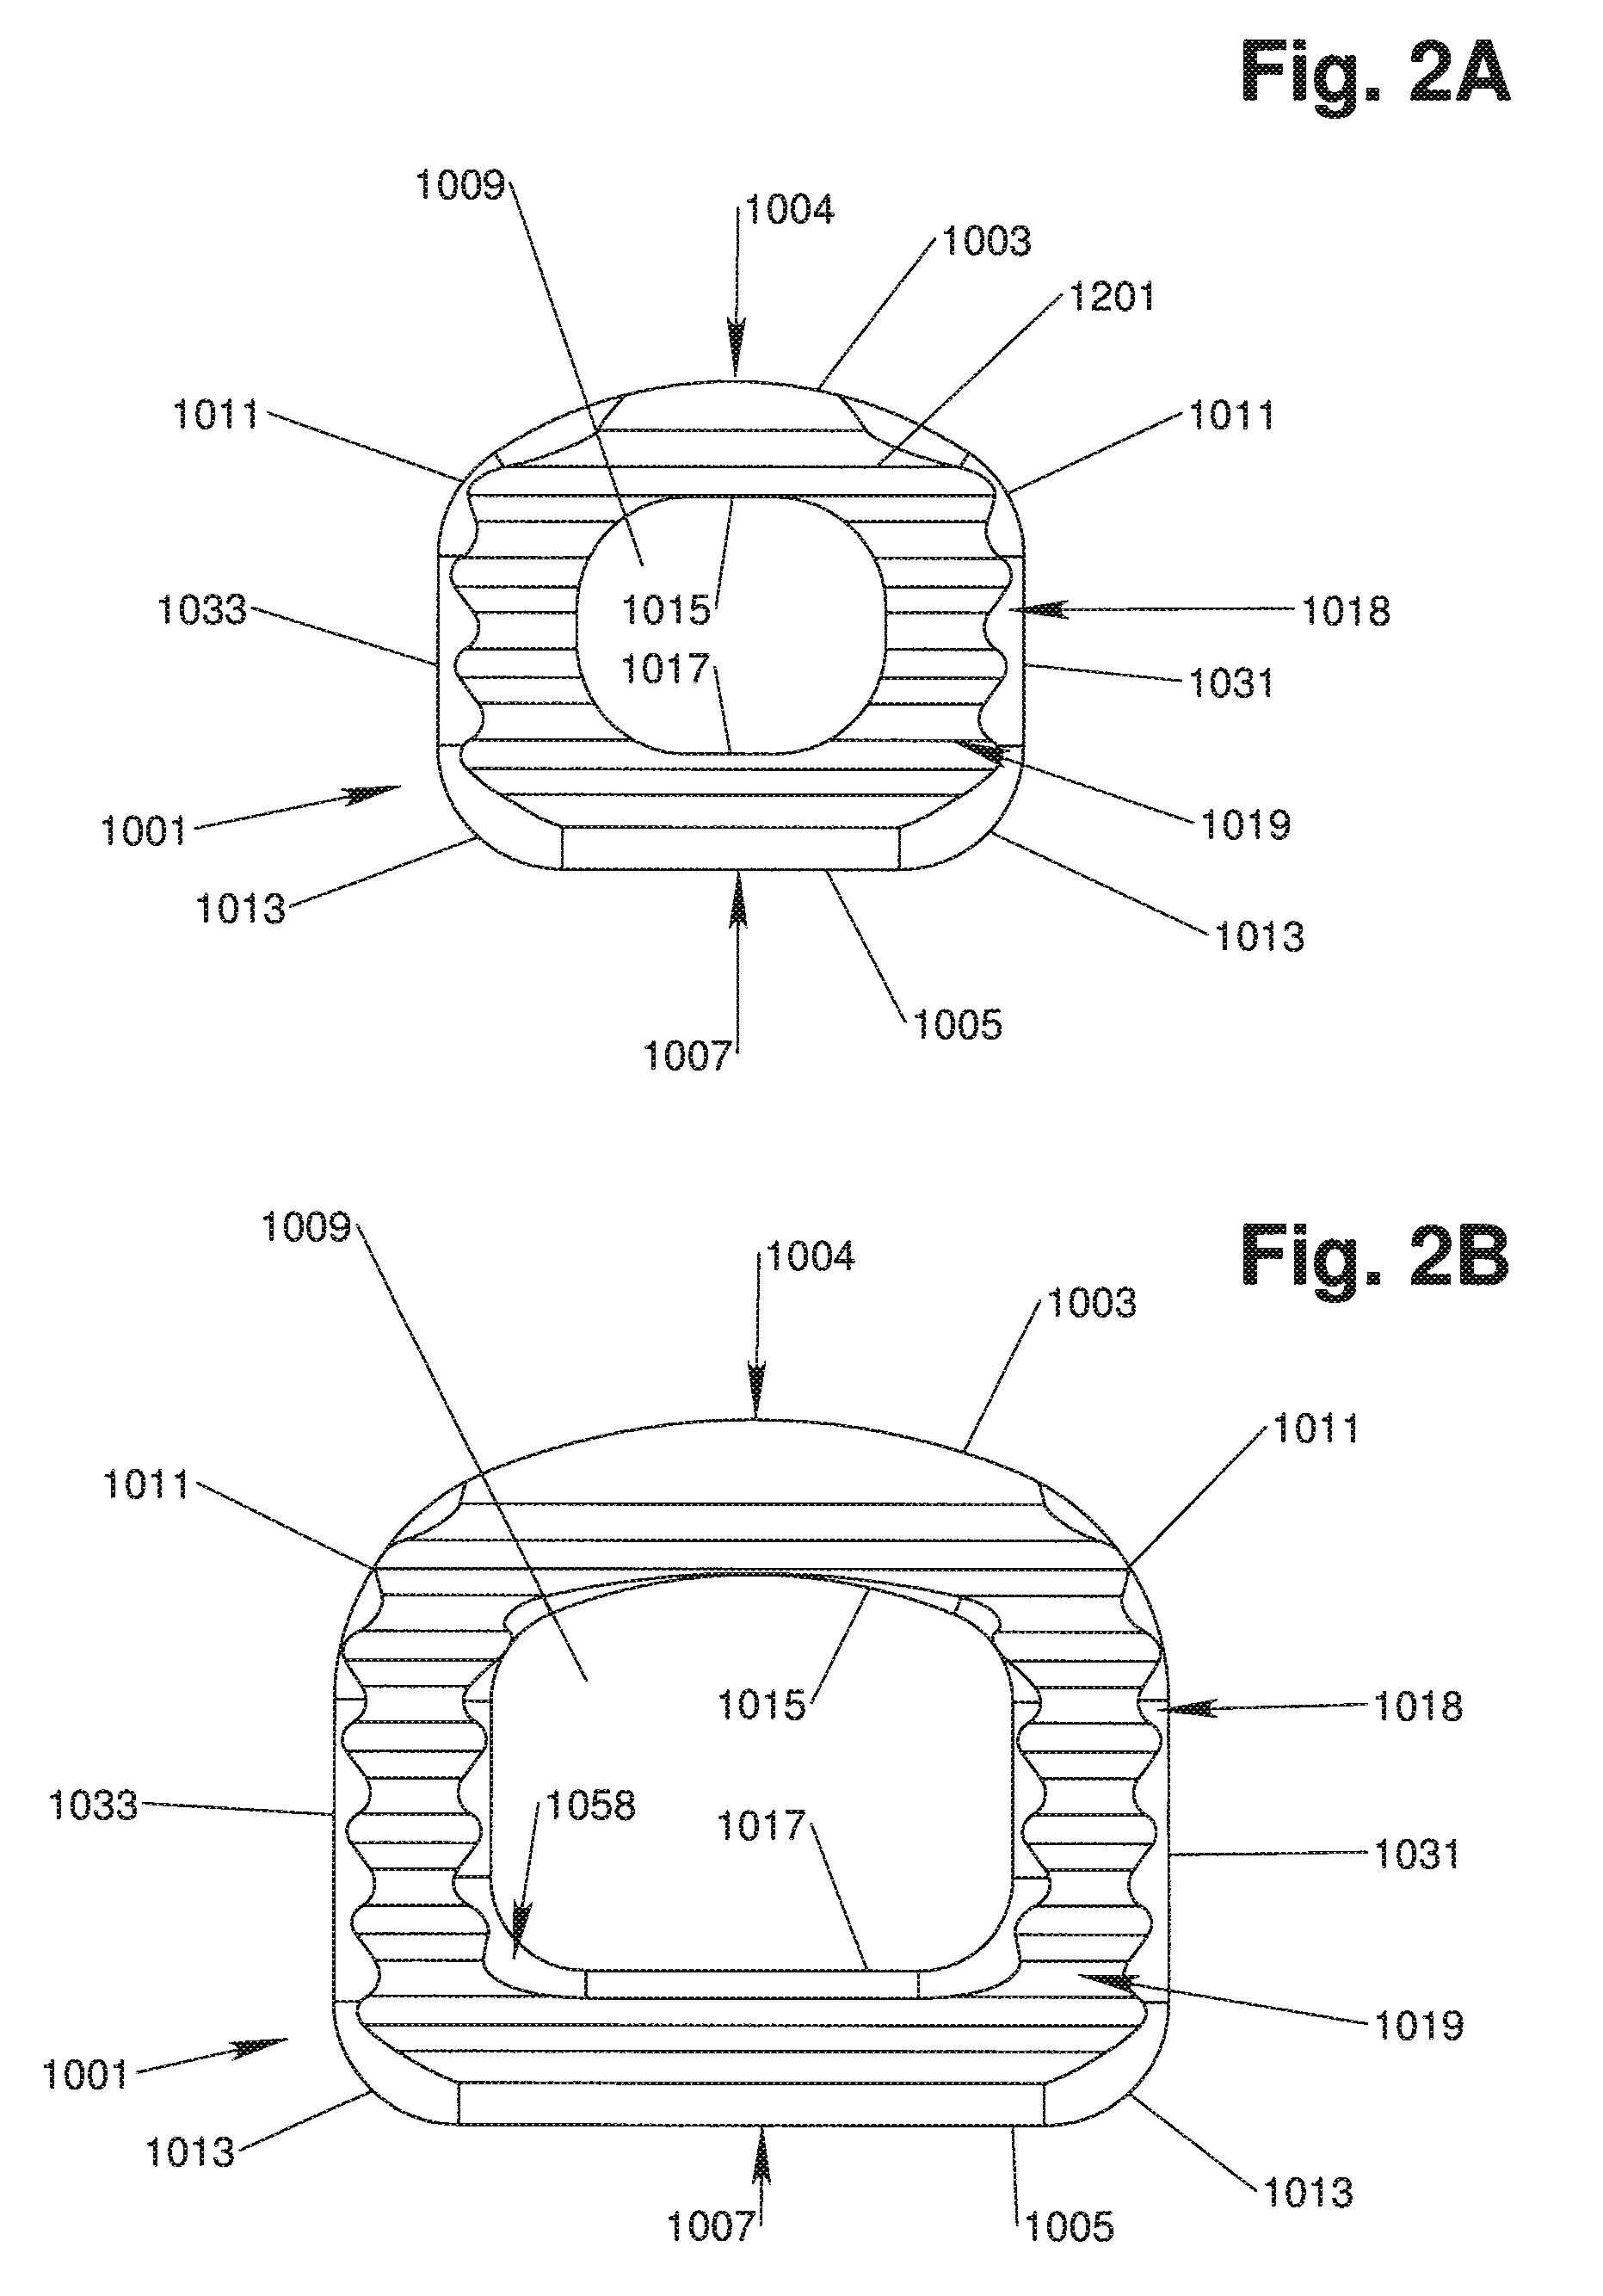 Intervertebral implant devices for supporting vertebrae and devices and methods for insertion thereof